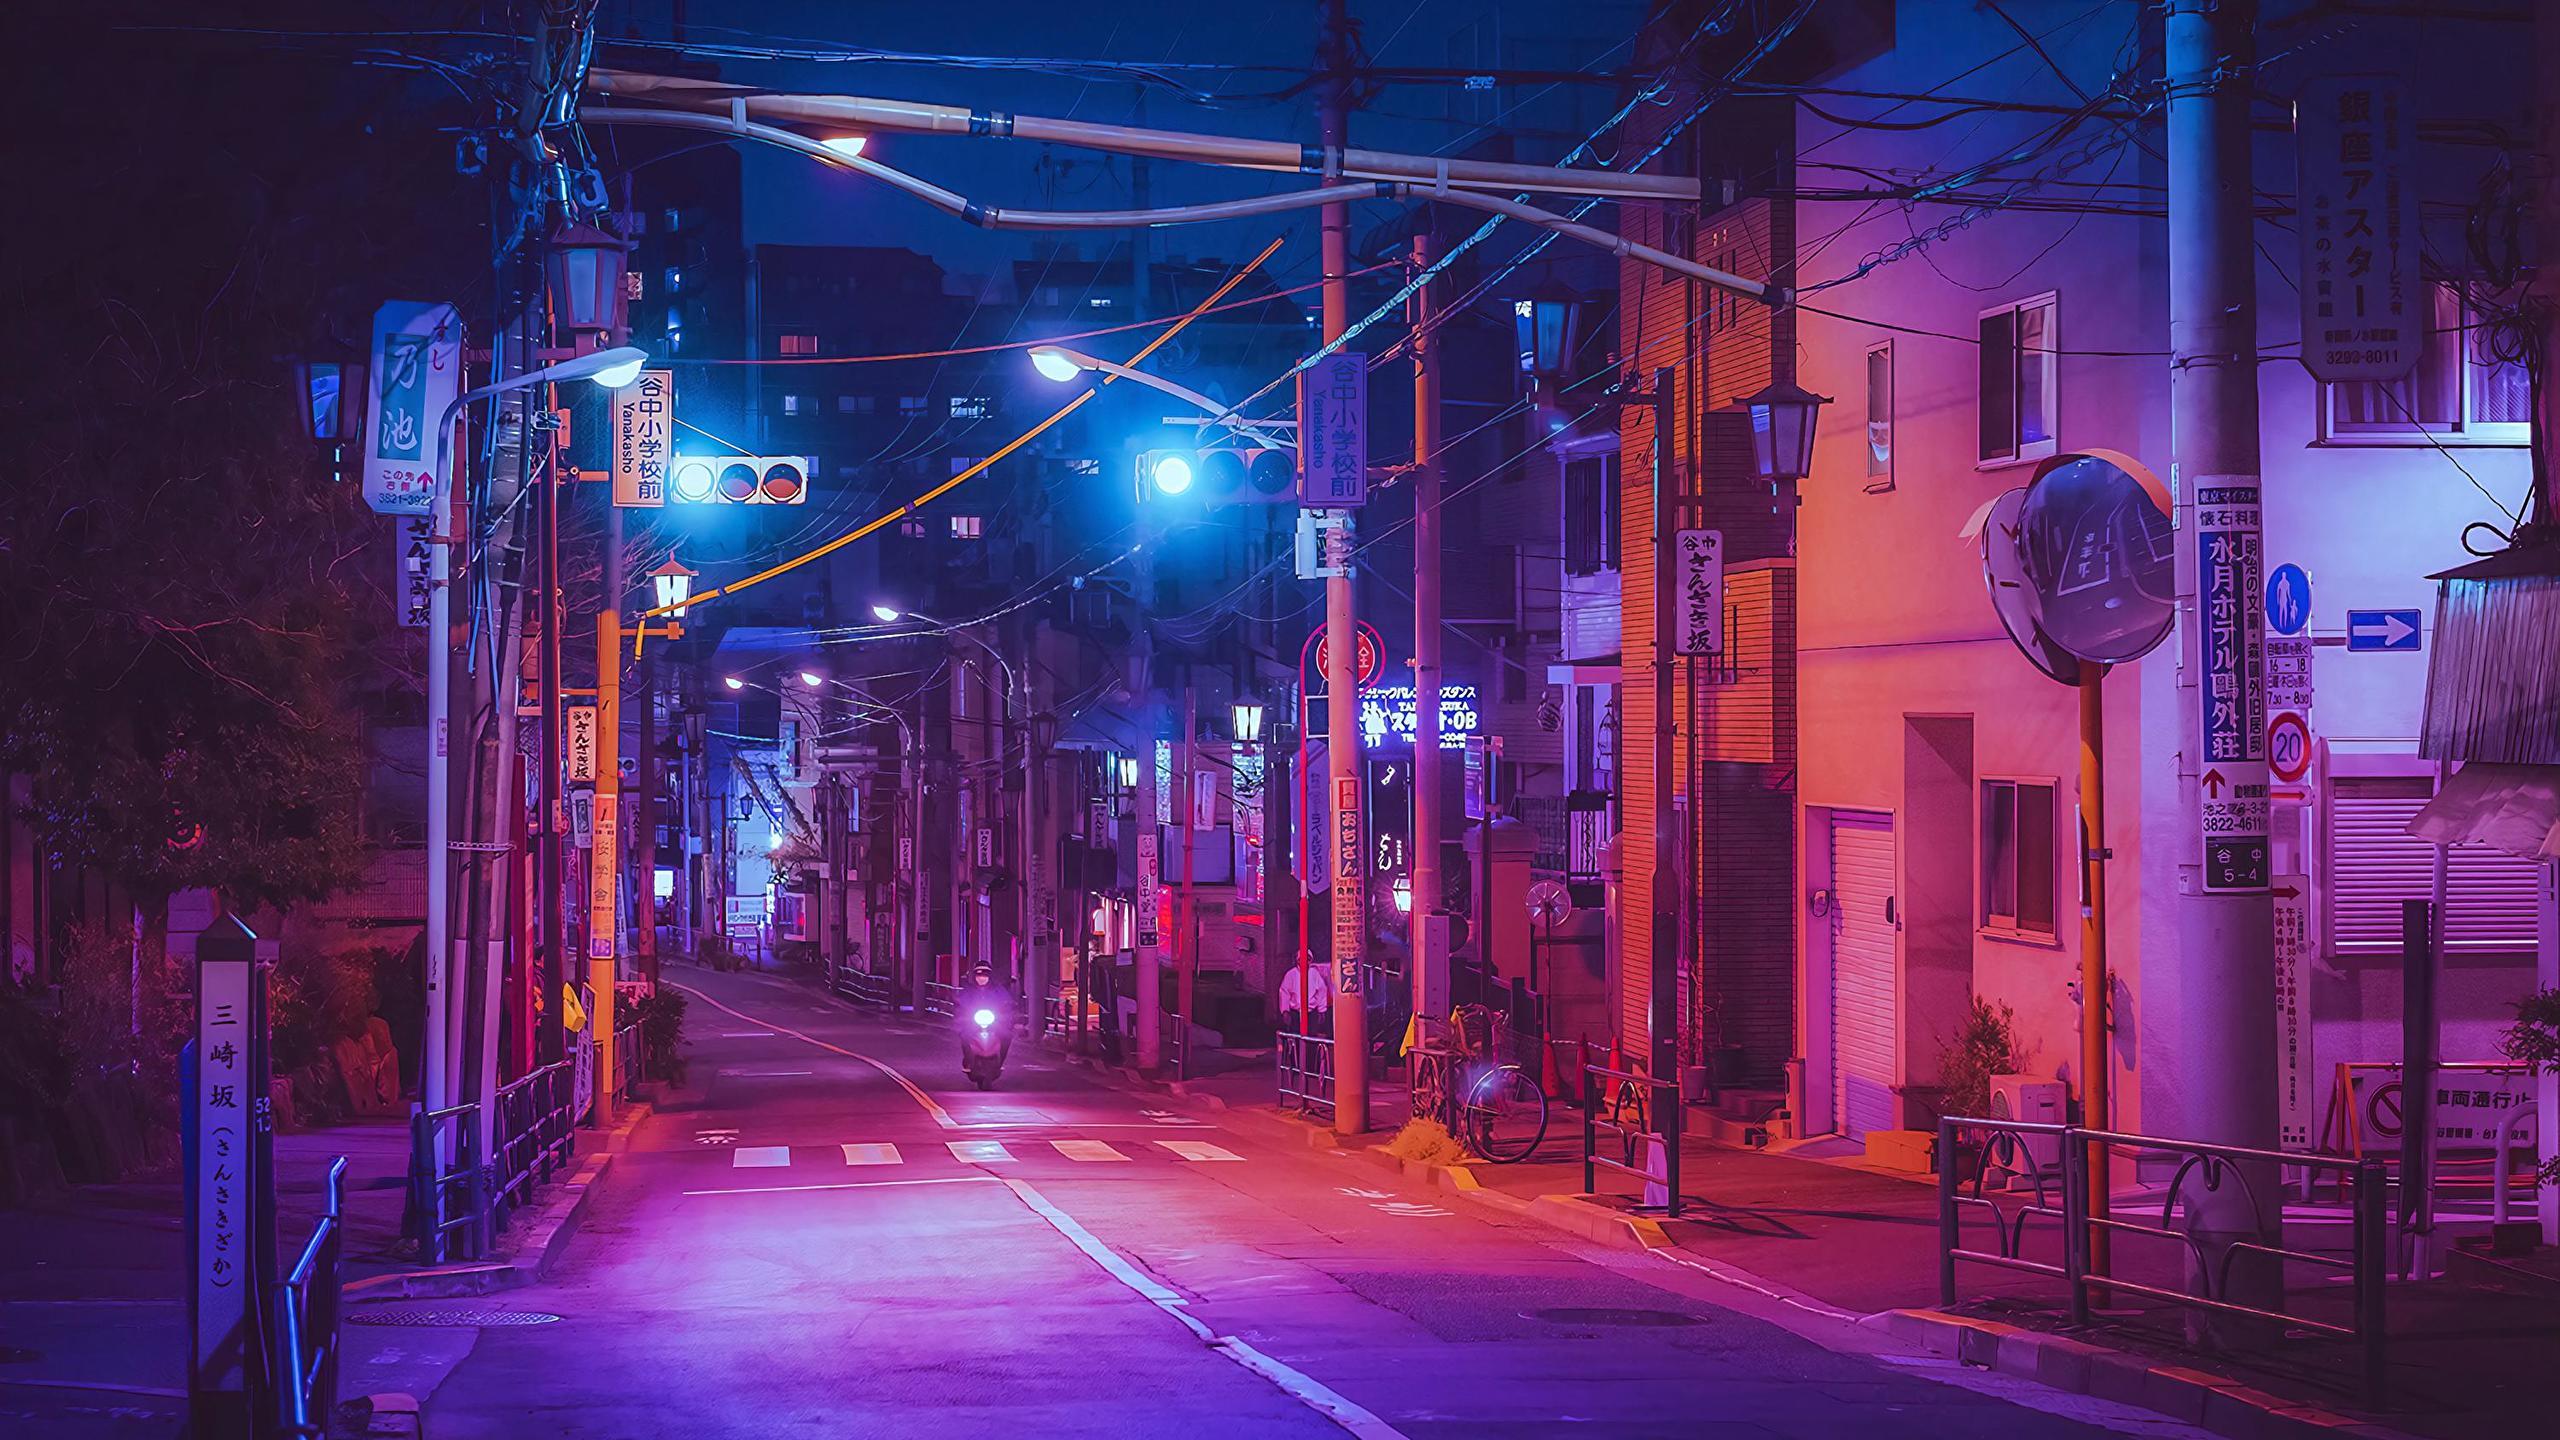 A dark and empty street at night - Japan